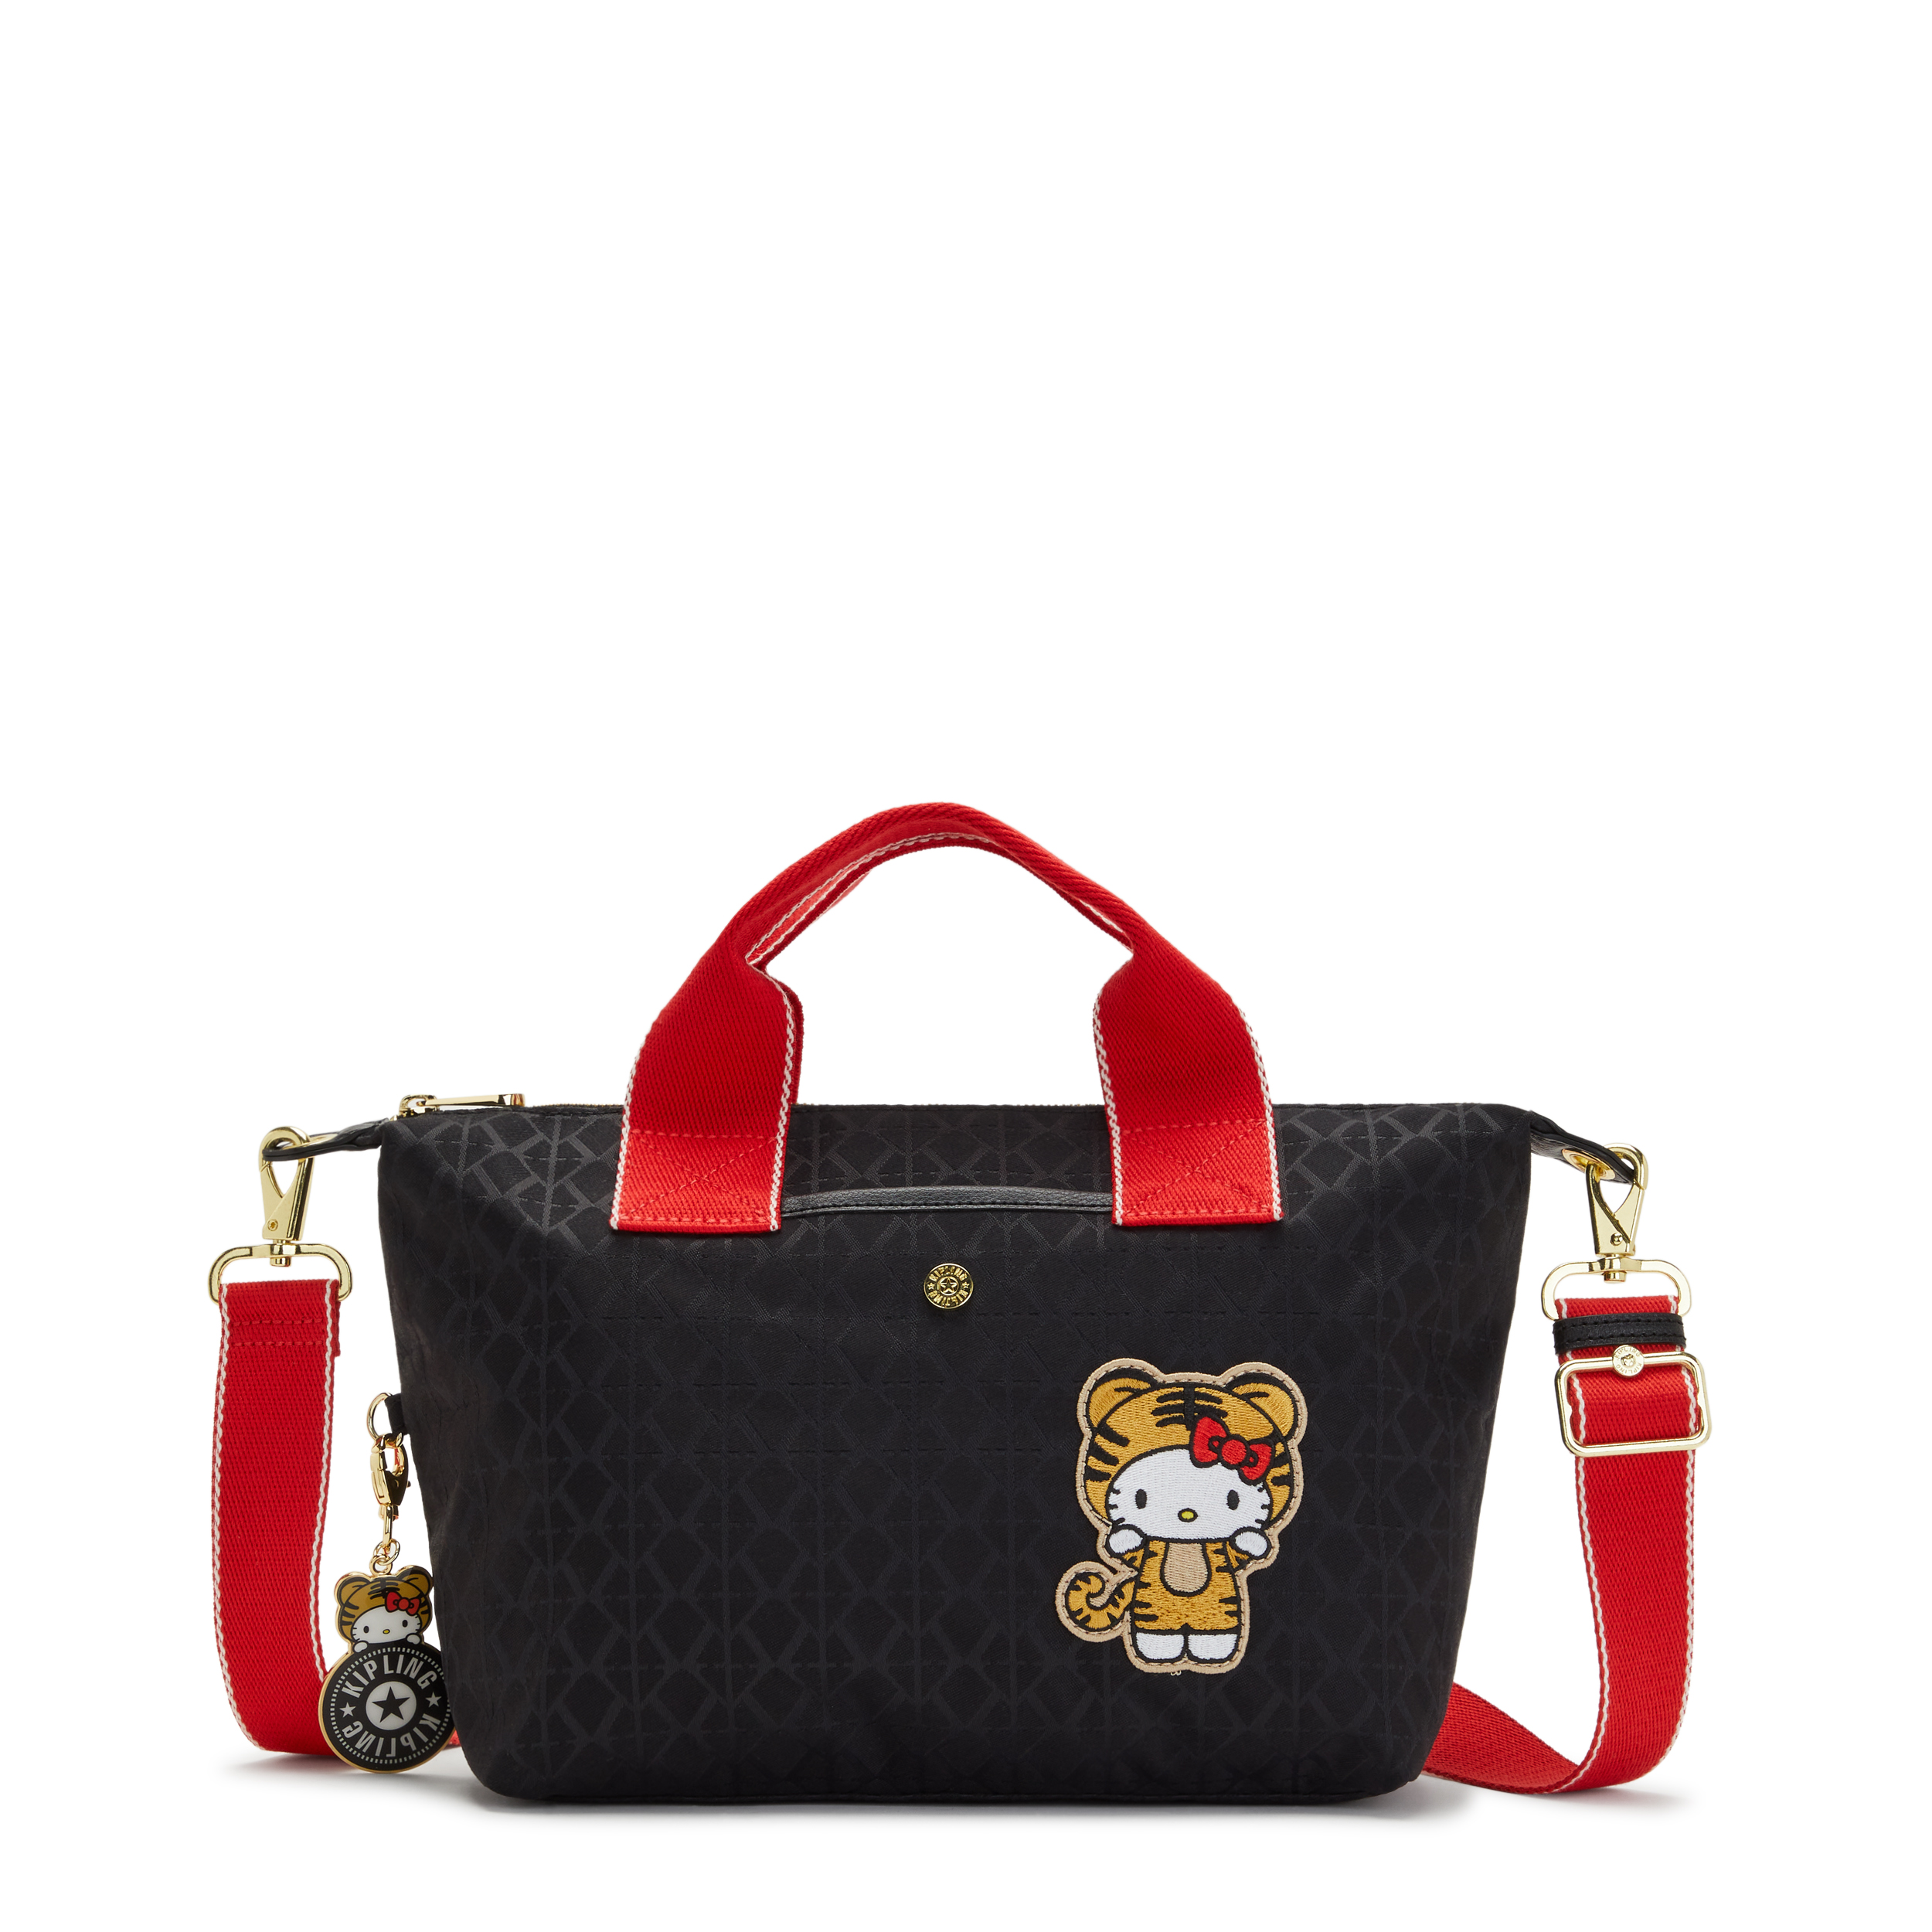 Kipling Has A New Series Of Hello Kitty Bags In Cute And Functional Styles